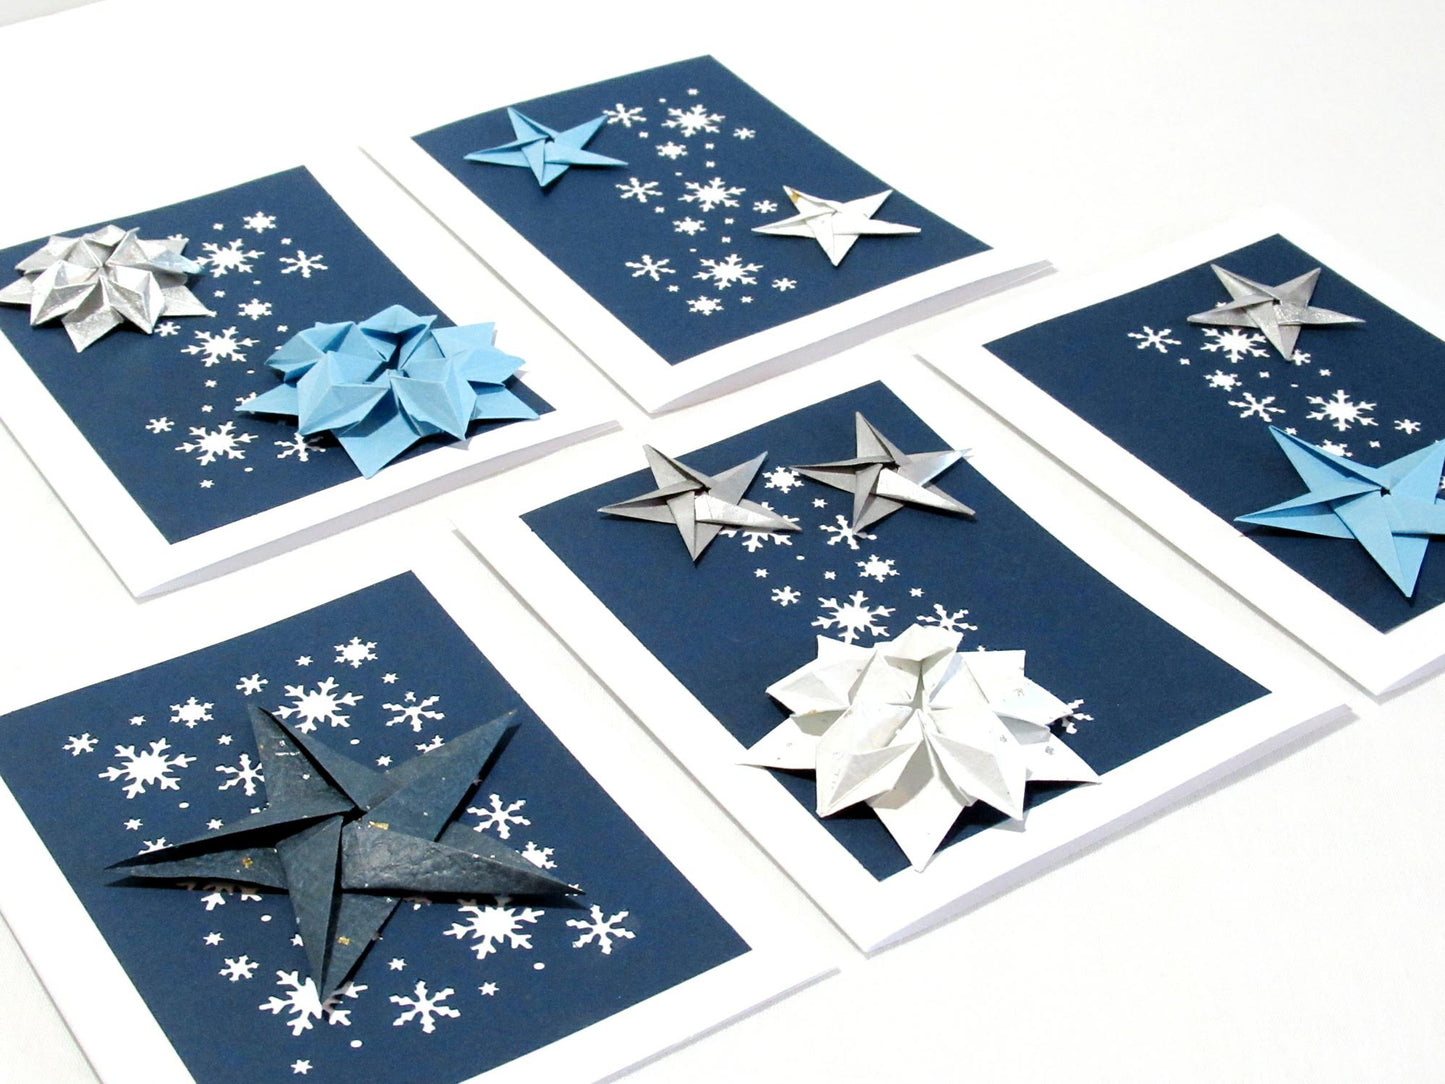 Set of five white cards. Each card has a dark blue background with white snowflakes. On top are a variety of origami stars in white, sliver and blue.